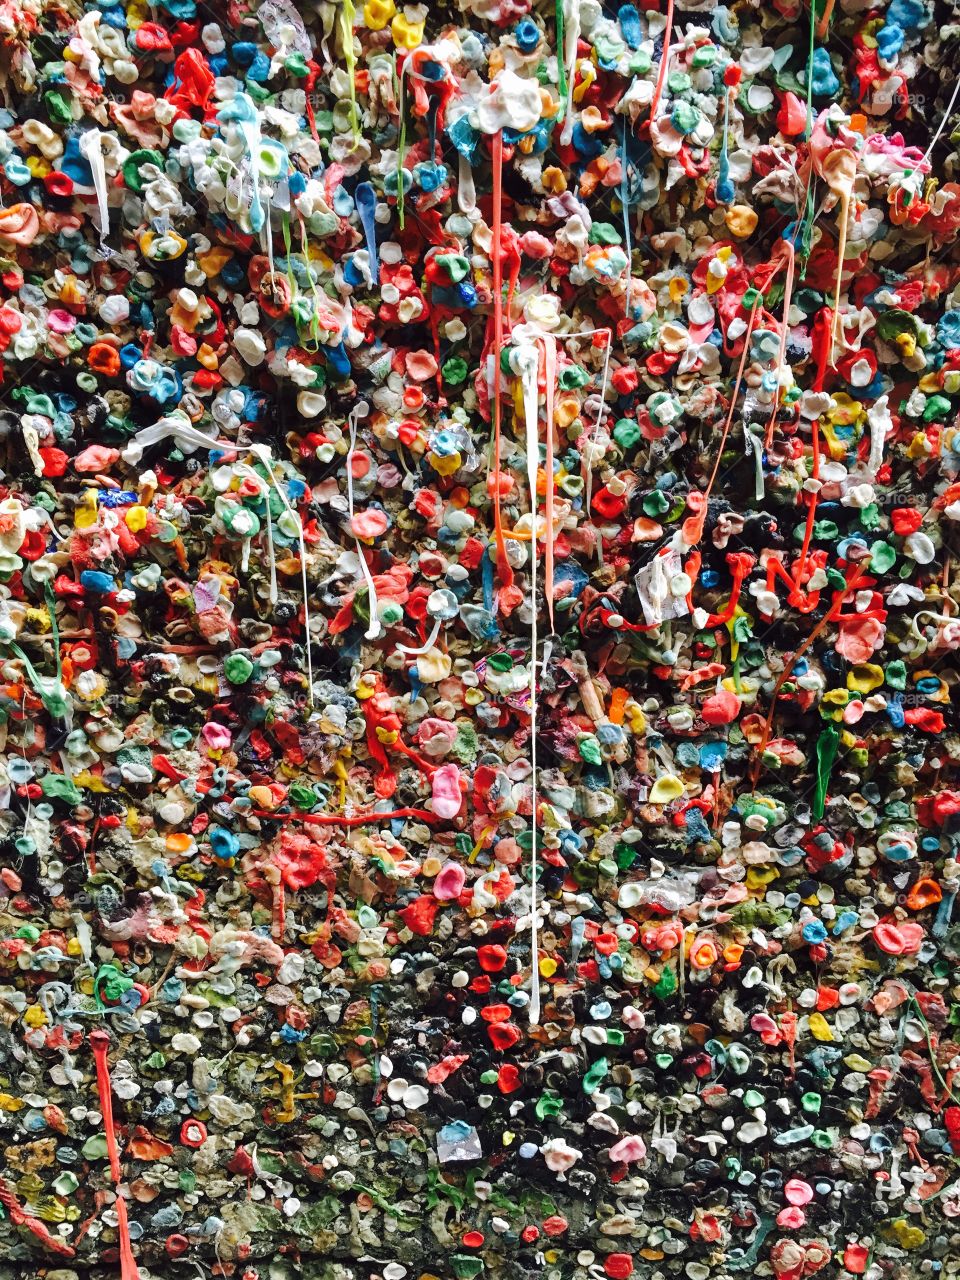 Gum Wall Seattle. Gum Wall, Pikes Place Seattle, WA